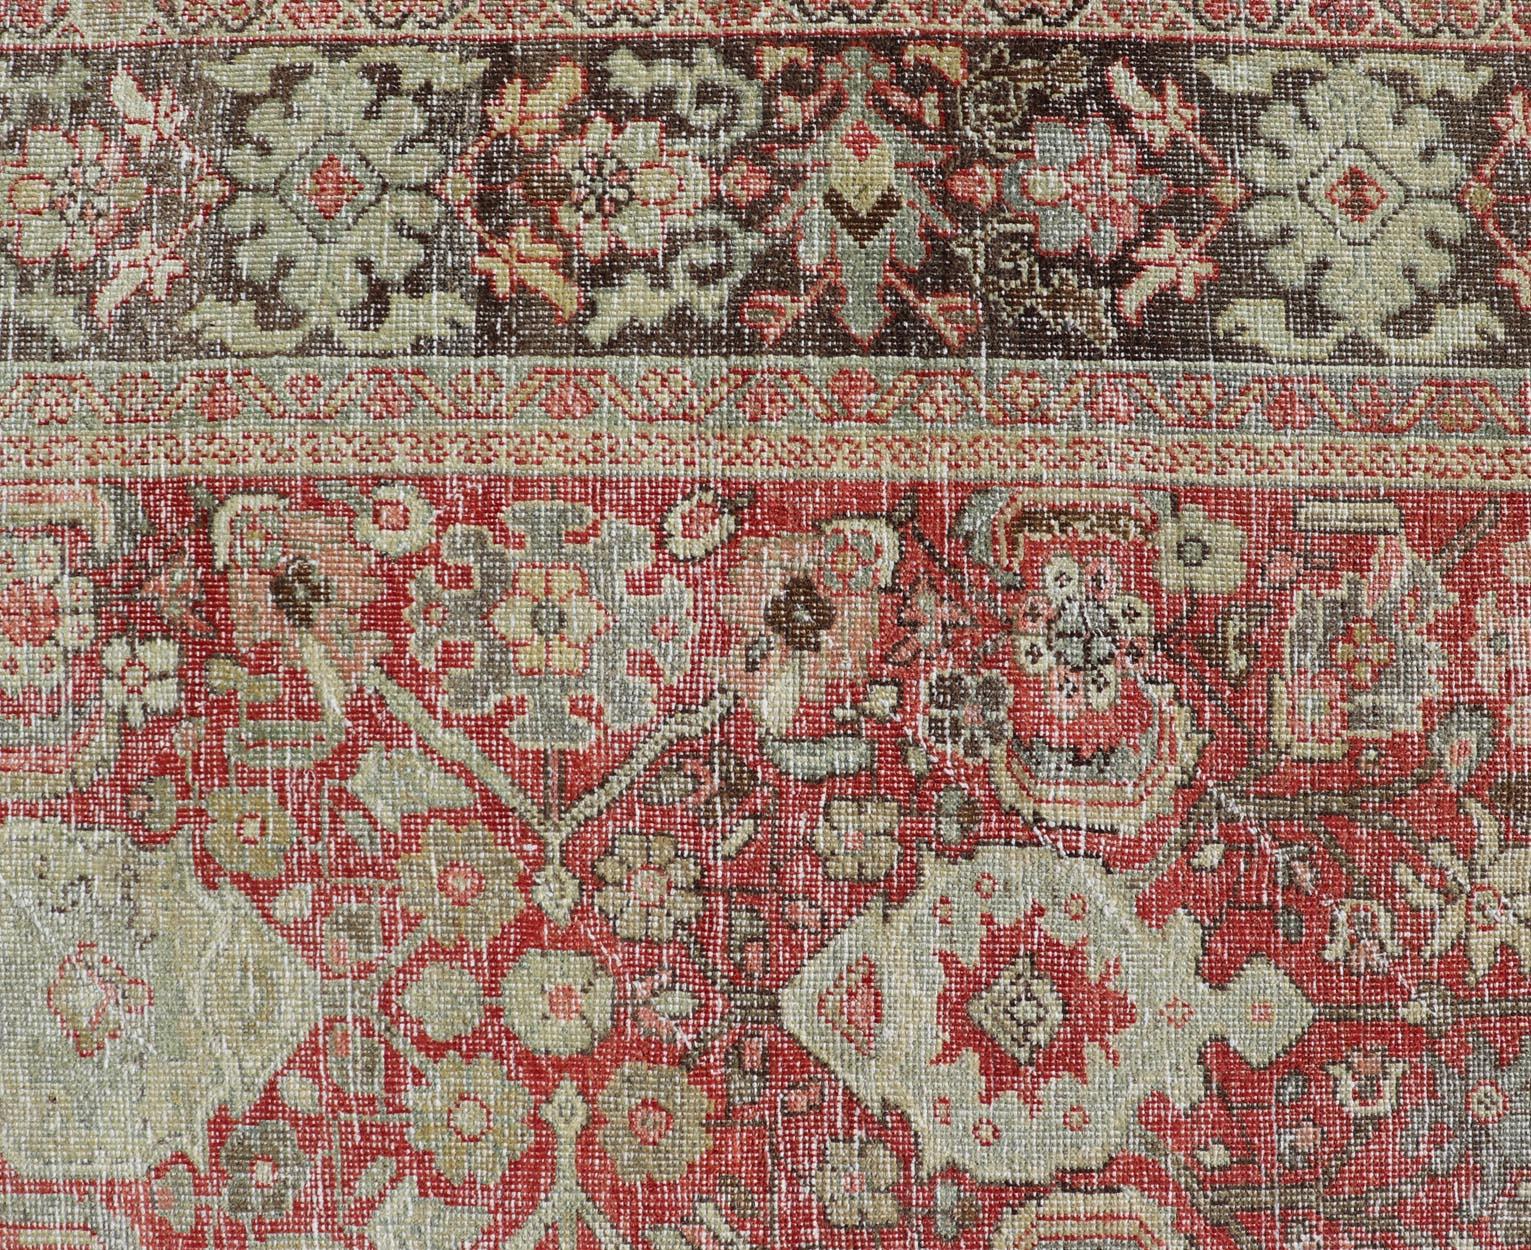 Measures: 7'2 x 10'0 
Antique Persian Colorful Mahal Rug with All over Floral Design On A Red Field. Keivan Woven Arts; rug EMB-22178-15030, country of origin / type: Iran / Mahal, circa 1930.

This 1930 colorful antique Persian Sultanabad Mahal